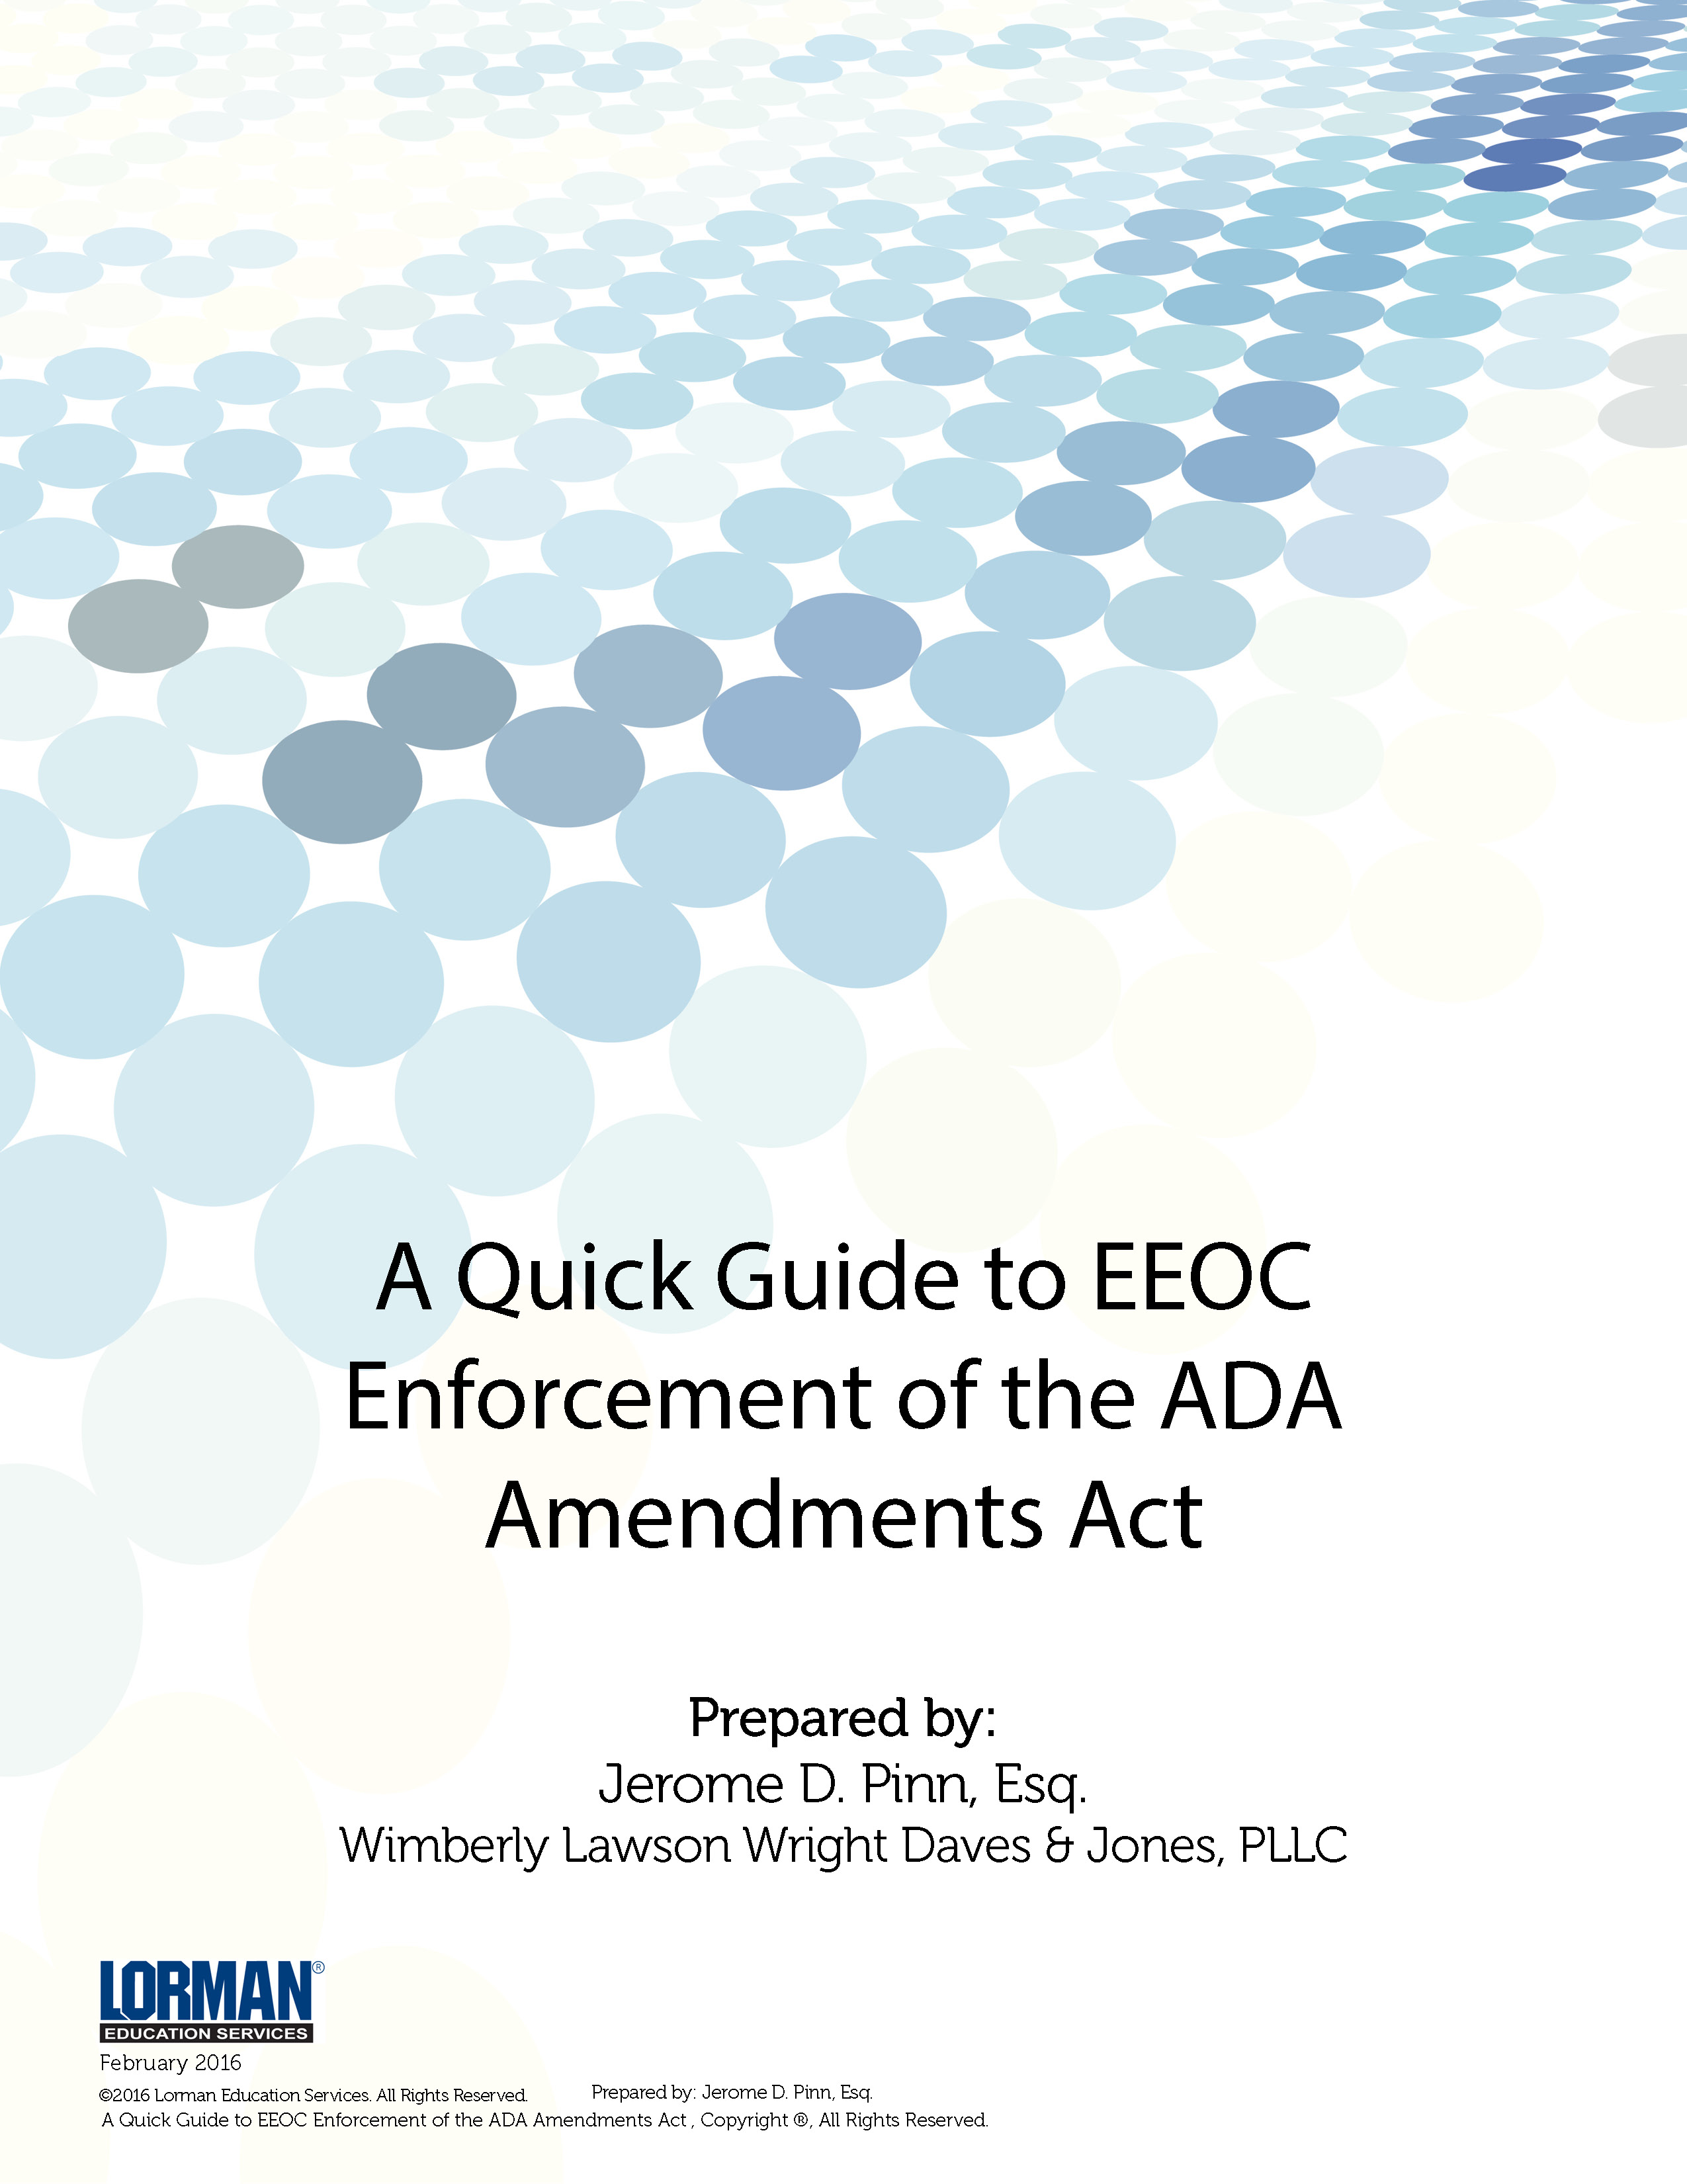 A Quick Guide to EEOC Enforcement of the ADA Amendments Act 